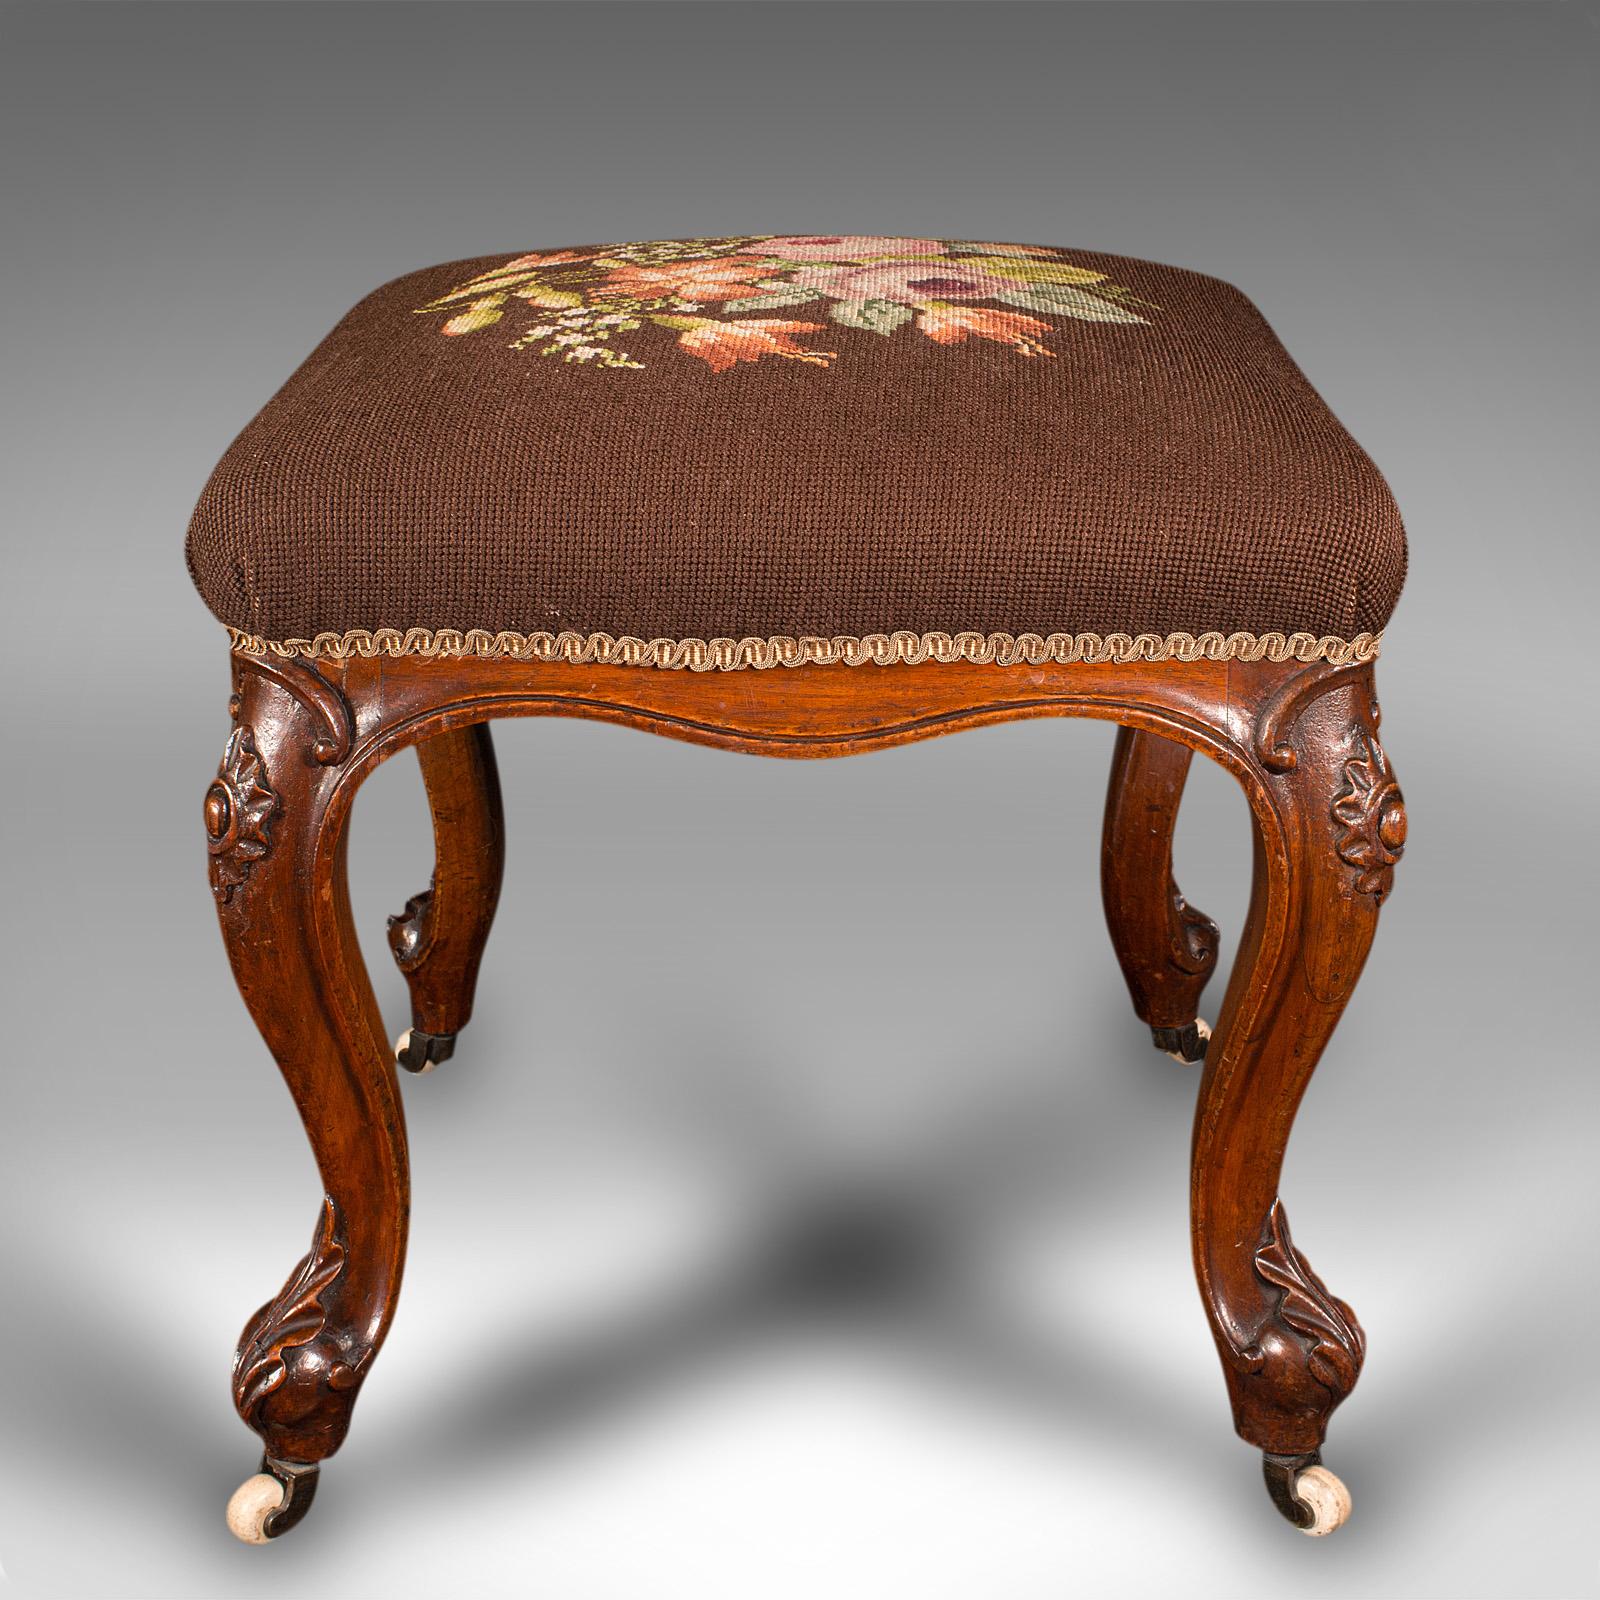 19th Century Antique Dressing Stool, English, Walnut, Needlepoint, Footstool, Early Victorian For Sale